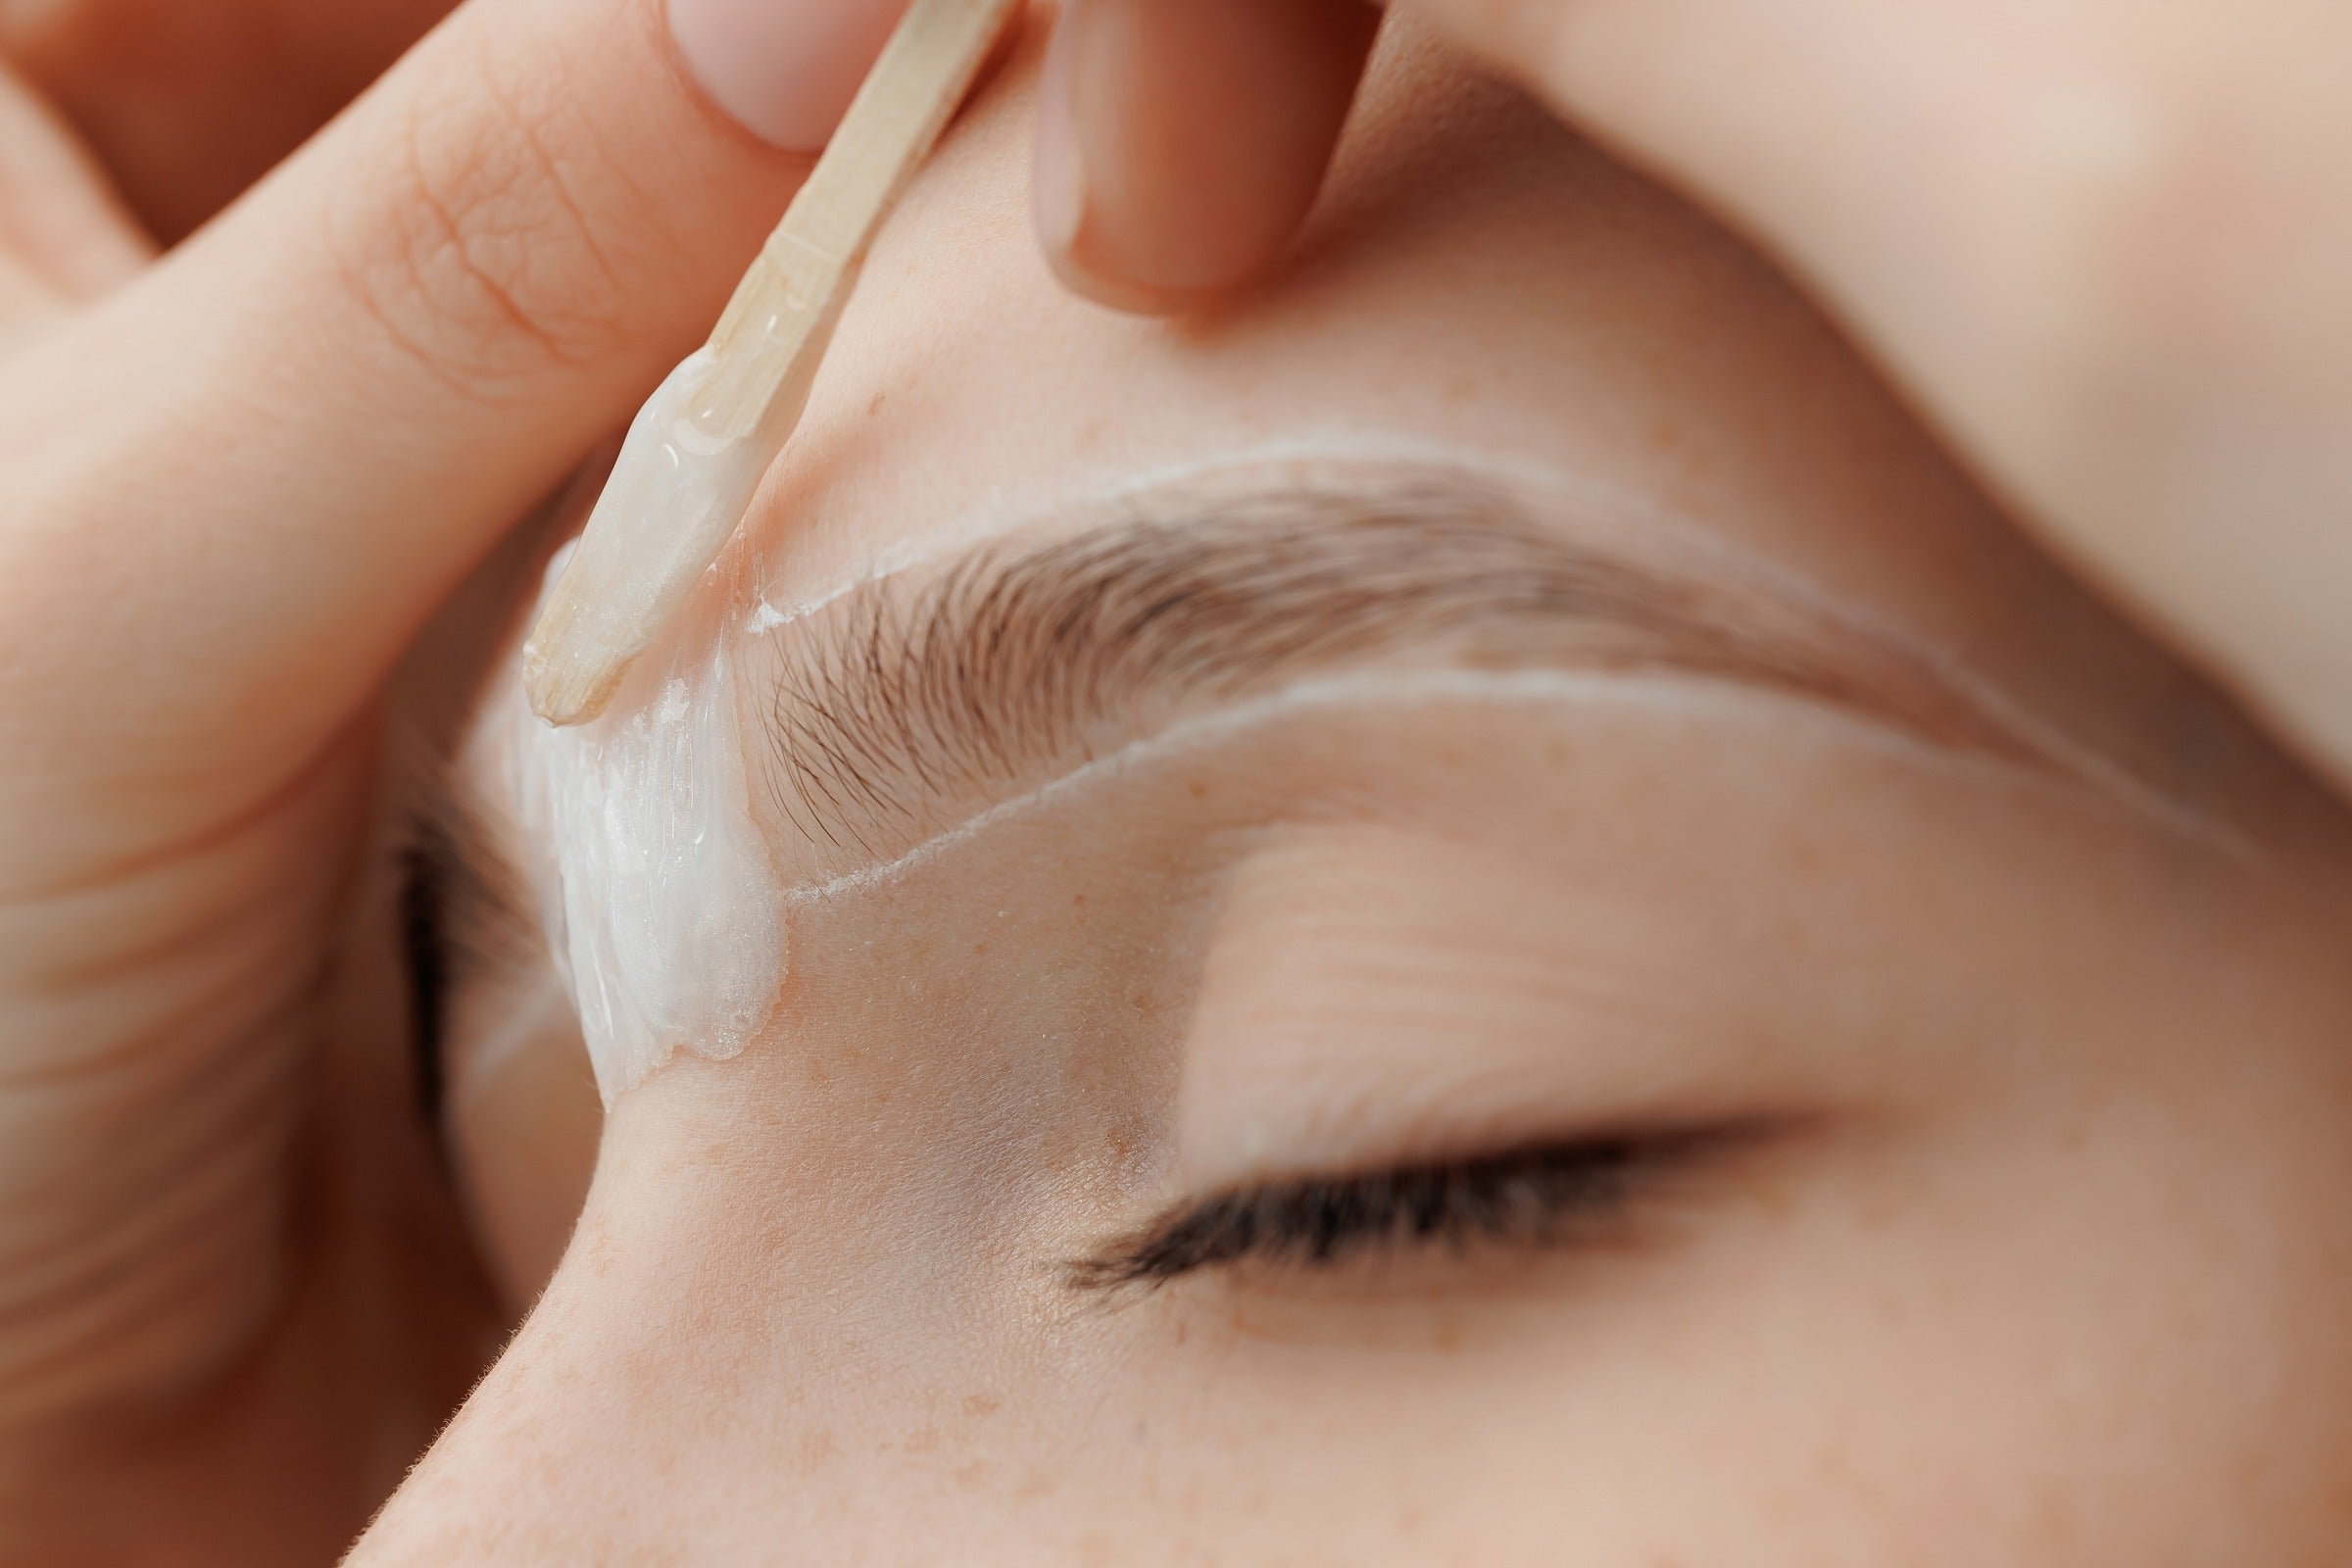 How to remove microblading at home